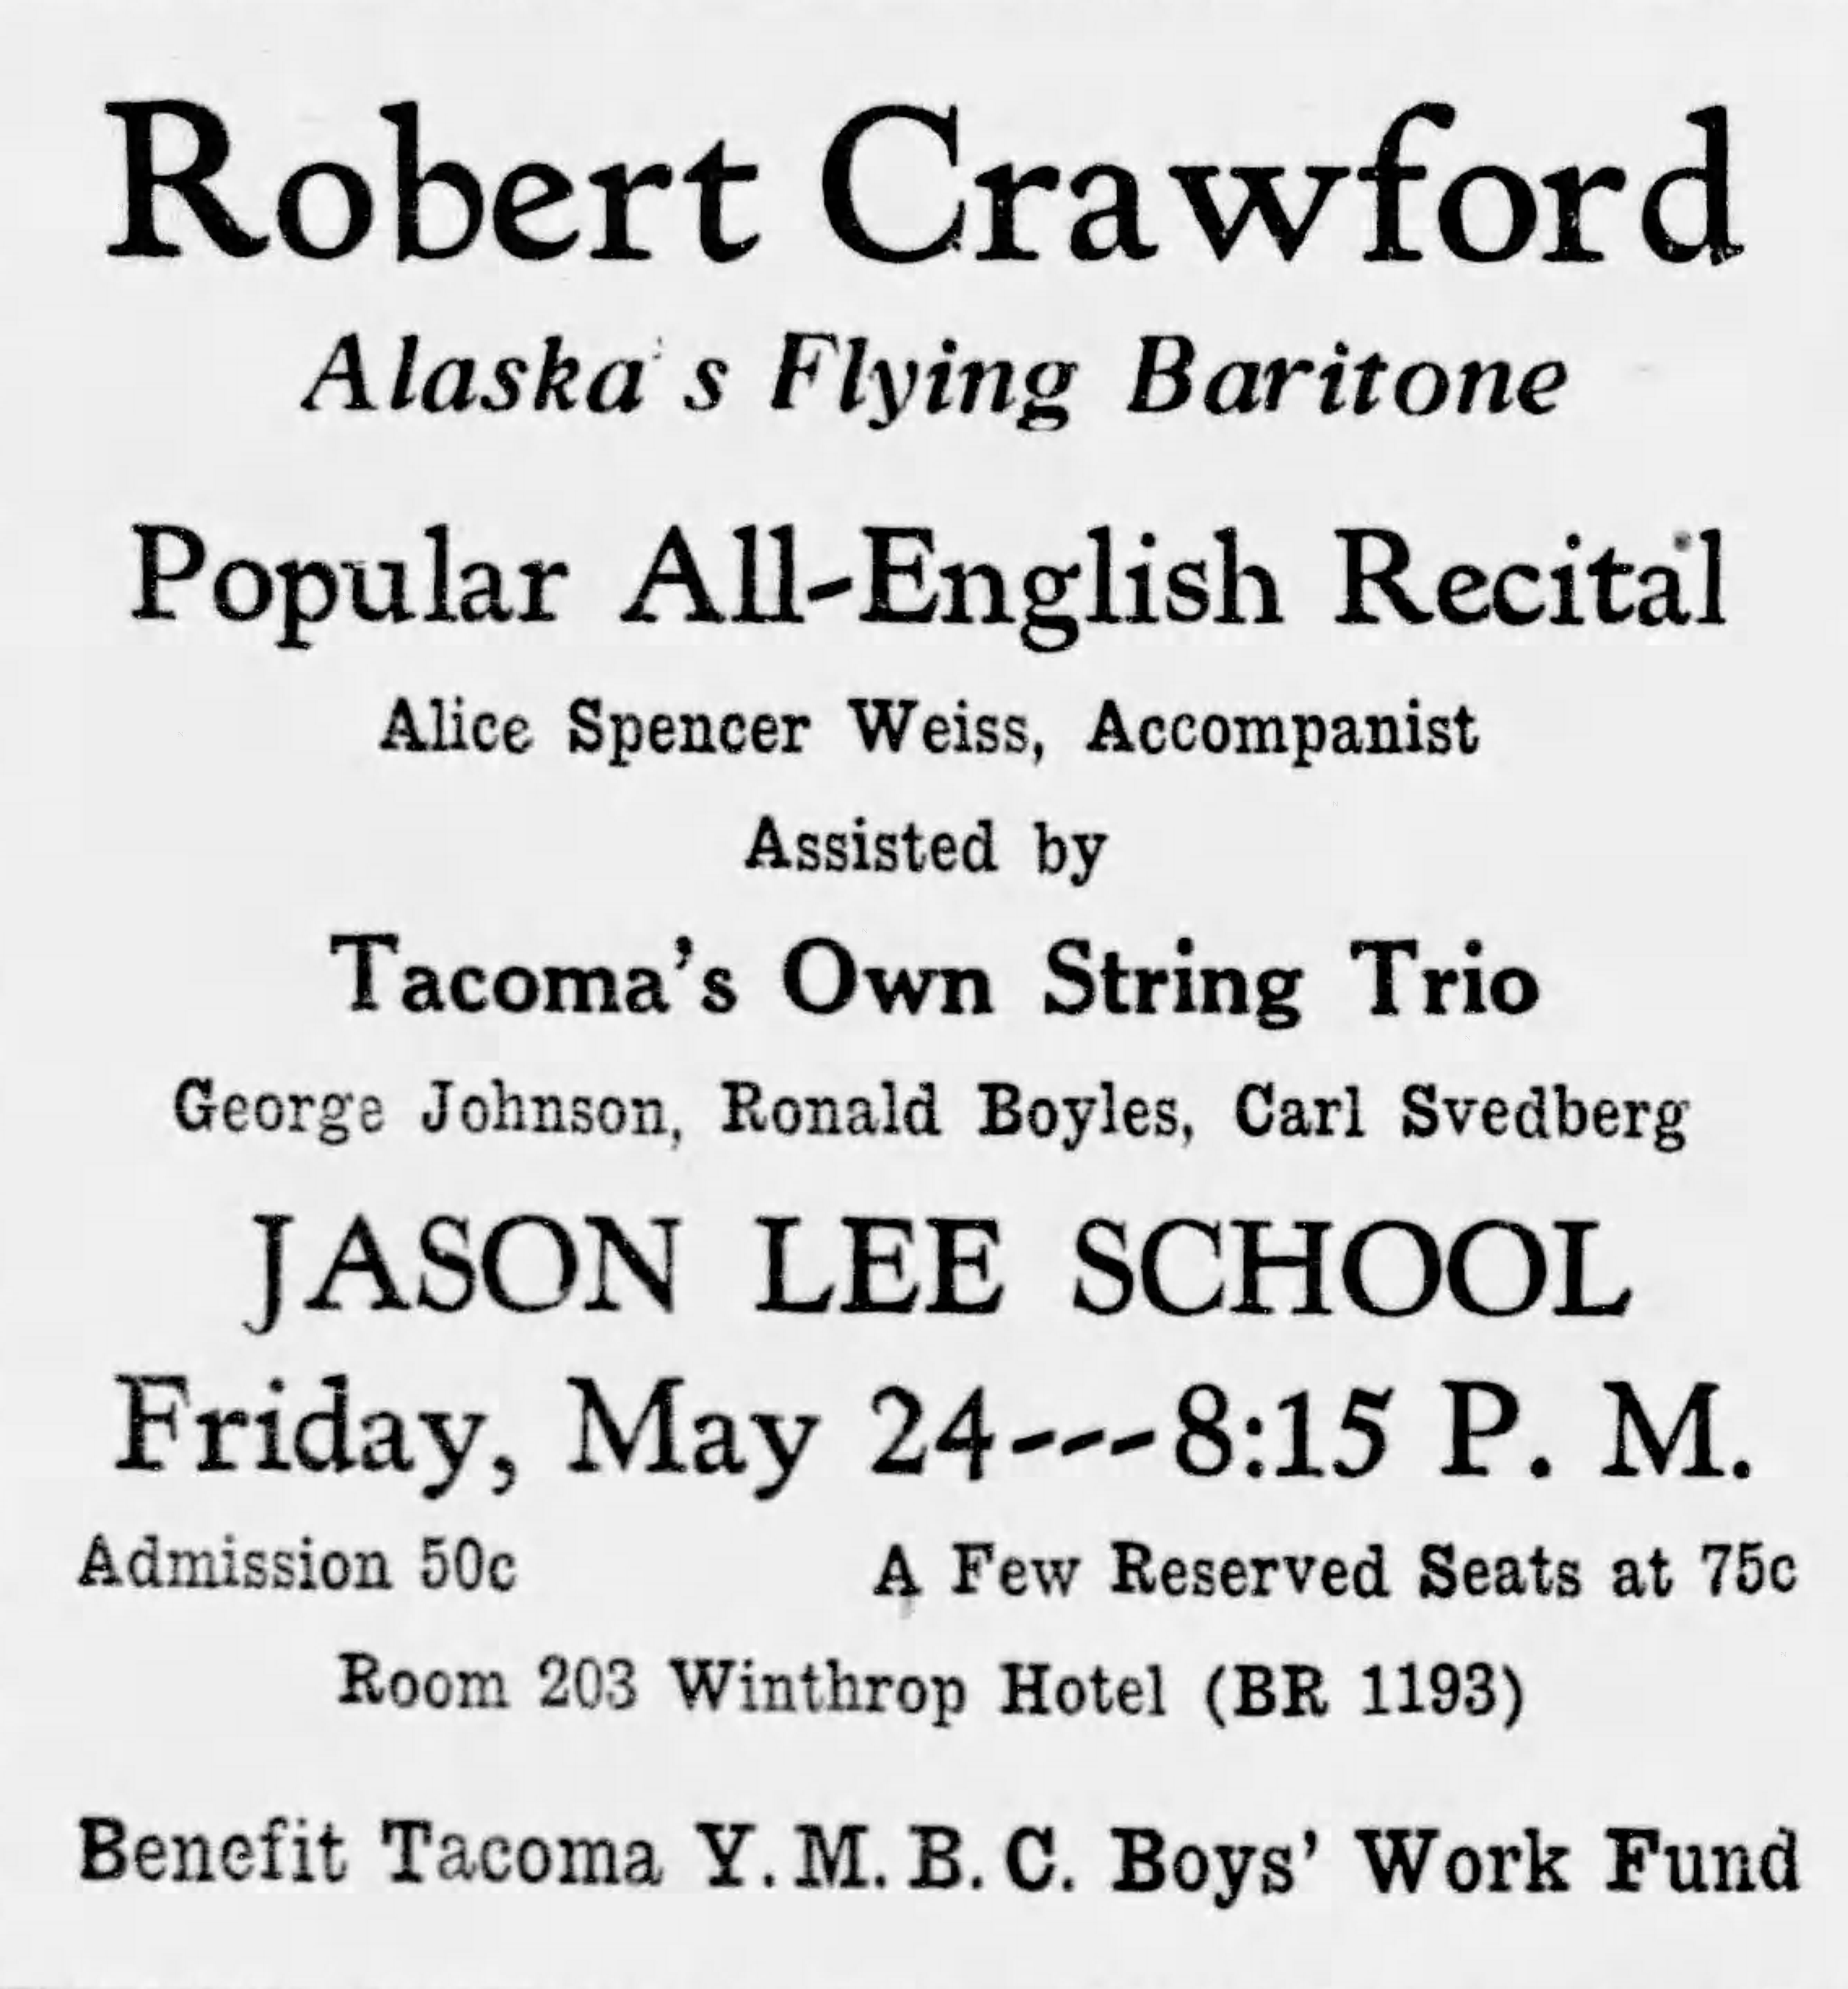 The Tacoma News Tribune, 21 May 1935. Advertisement for Robert Crawford recital. Text of advertisement:: Robert Crawford, Alaska's Flying Baritone Popular All-English Recital Alice Spencer Weiss, Accompanist Assisted by Tacoma's Own String Trio George Johnson, Ronald Boyles, Carl Svedberg Jason Lee School Friday, May 24---8:15 P.M. Admission 50¢   A Few Reserved Seats at 75¢ Room 203 Wintrhrop Hotel (BR 1193) Benefit Tacoma Y.M.B.C. Boys' Work Fund